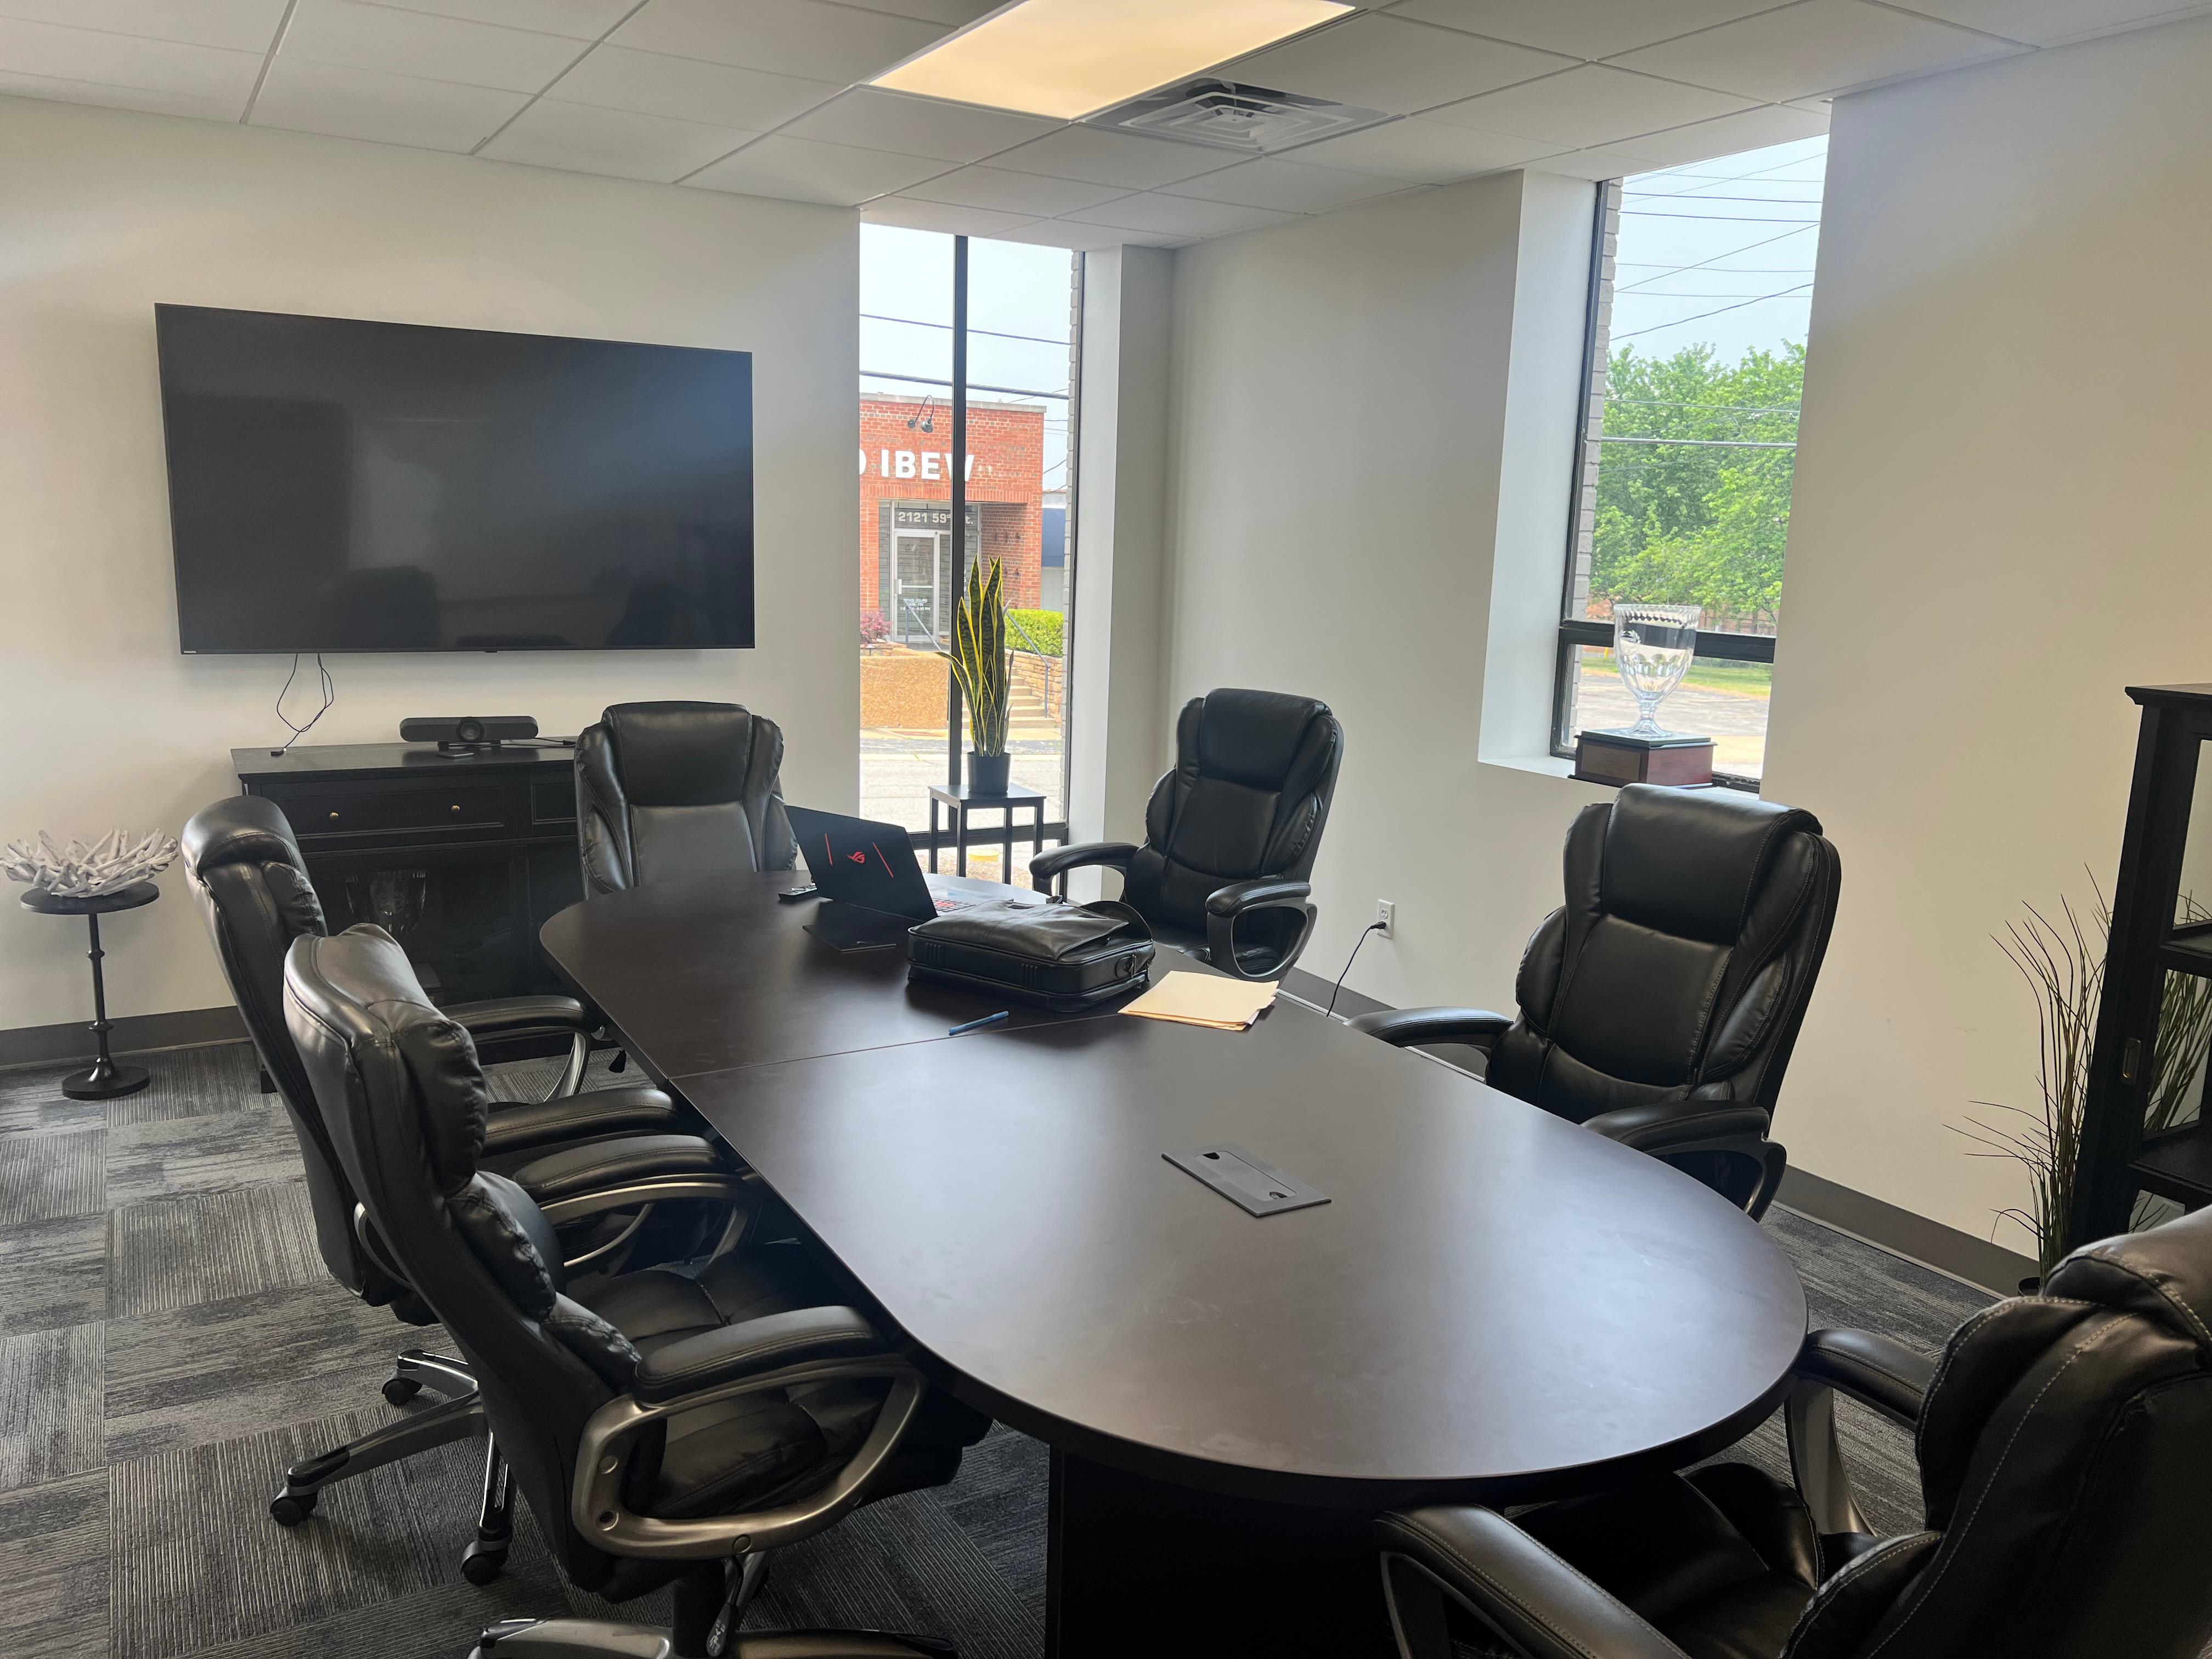 SERVPRO of St. Louis Central Conference Room